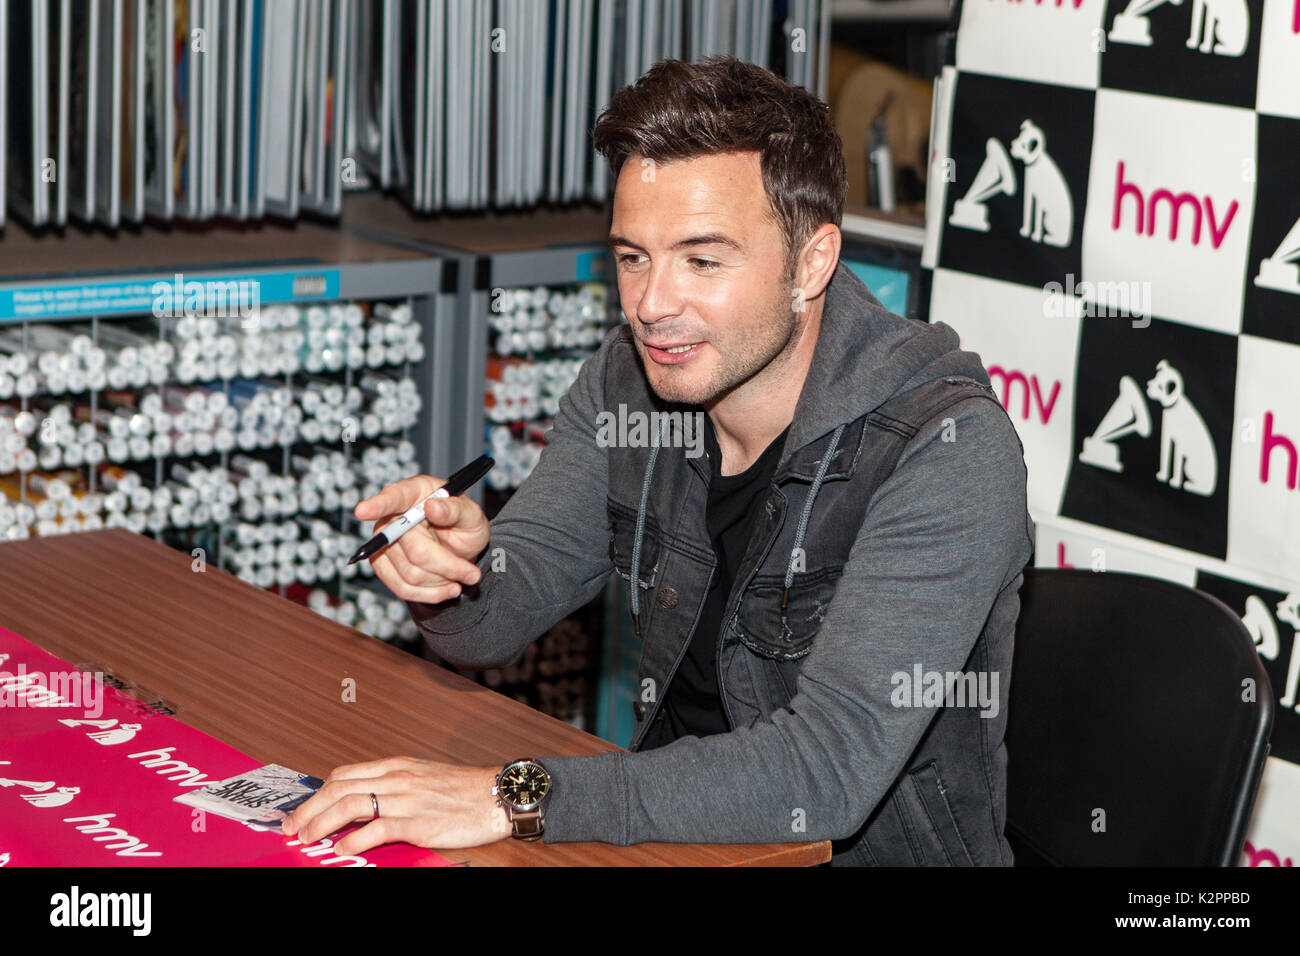 HMV Shop, High Street, Belfast, Northern Ireland. 31st August 2017. Pop Star Shane Filan was in Belfast to meet fans at the launch of his new Album 'Love Always' prior to his concert at the SSE Arena. Credit: Bonzo/Alamy Live News Stock Photo